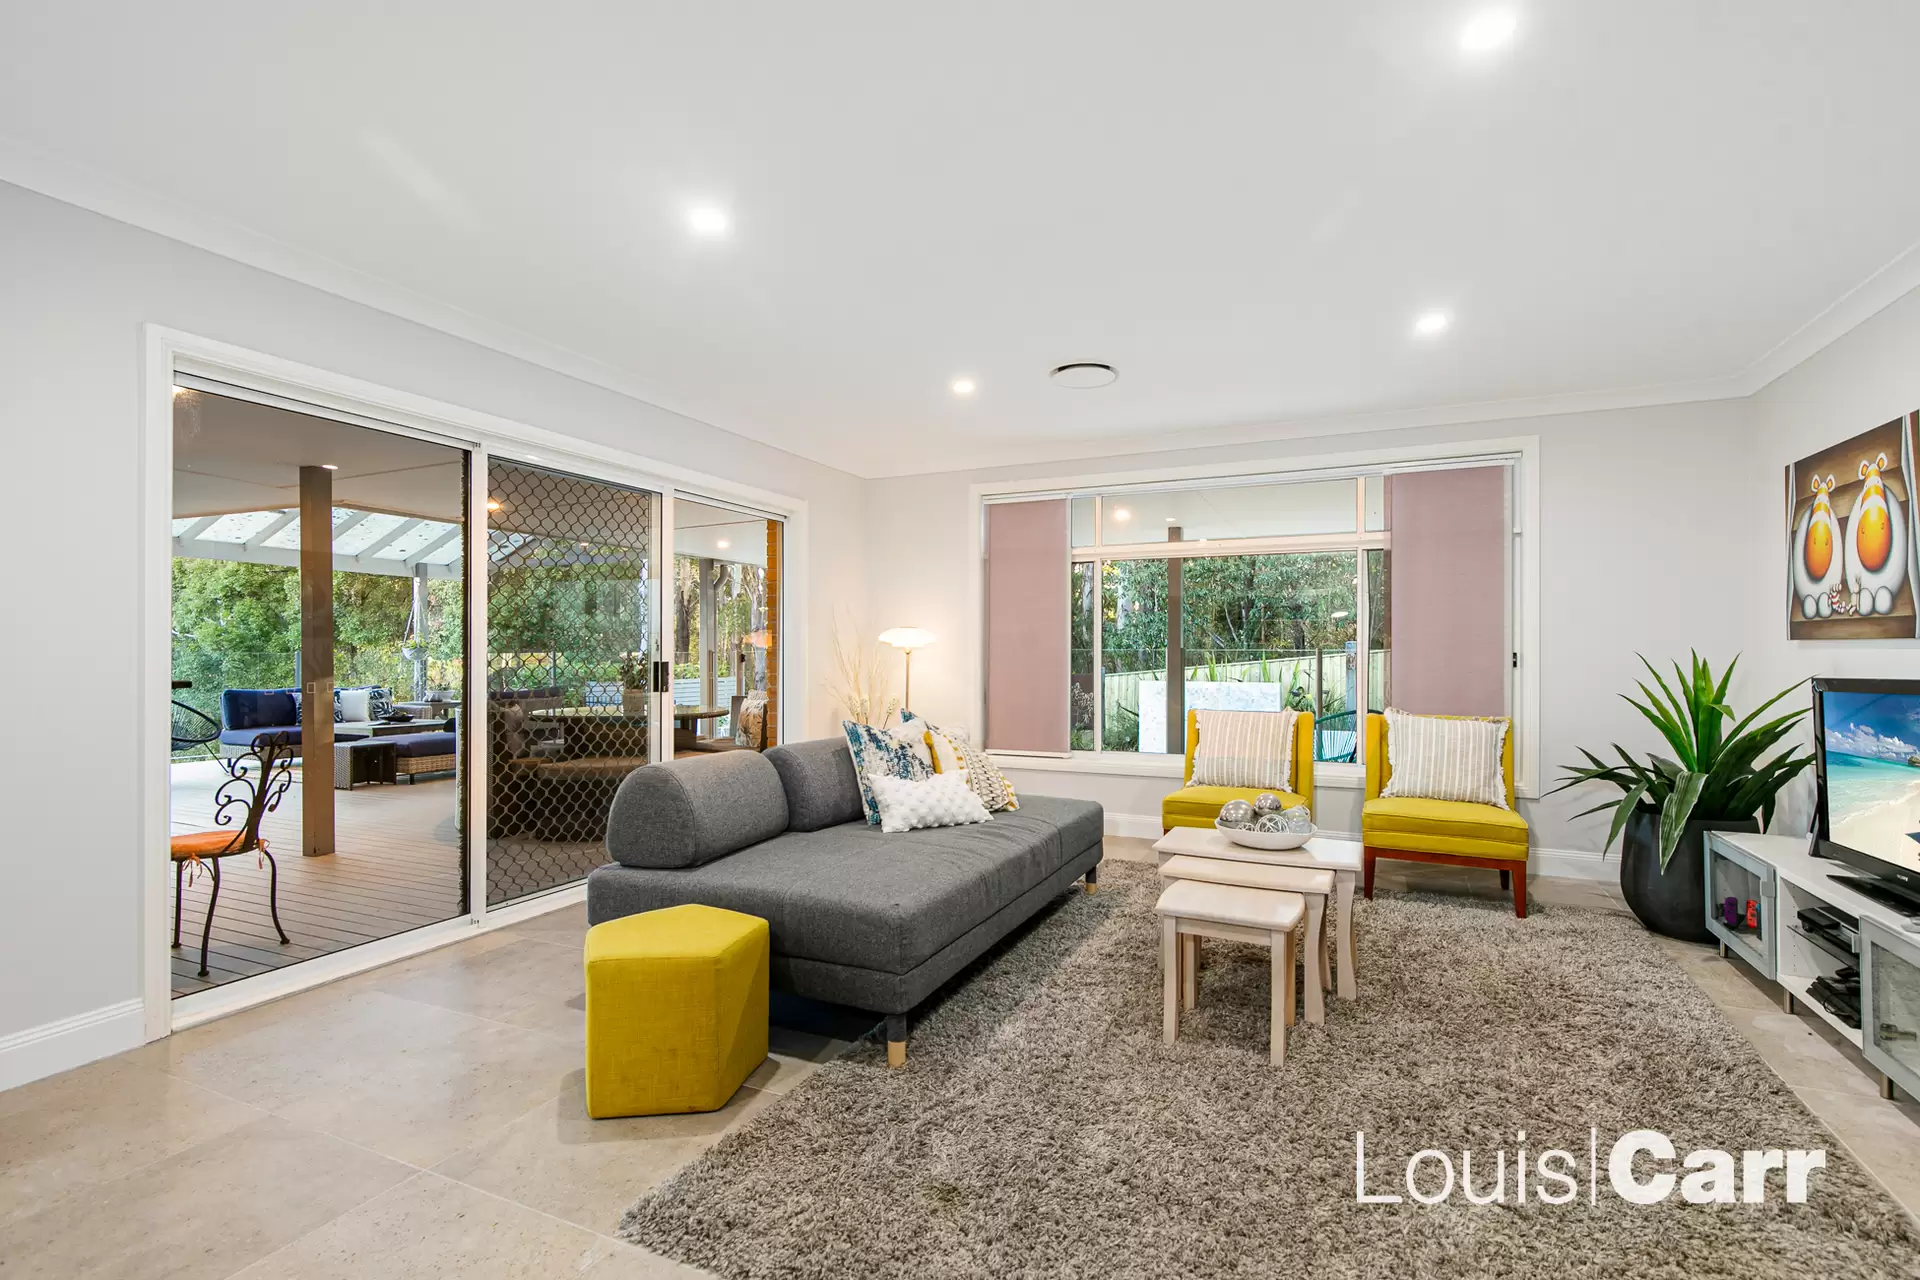 Photo #7: 4 Gumleaf Place, West Pennant Hills - Sold by Louis Carr Real Estate